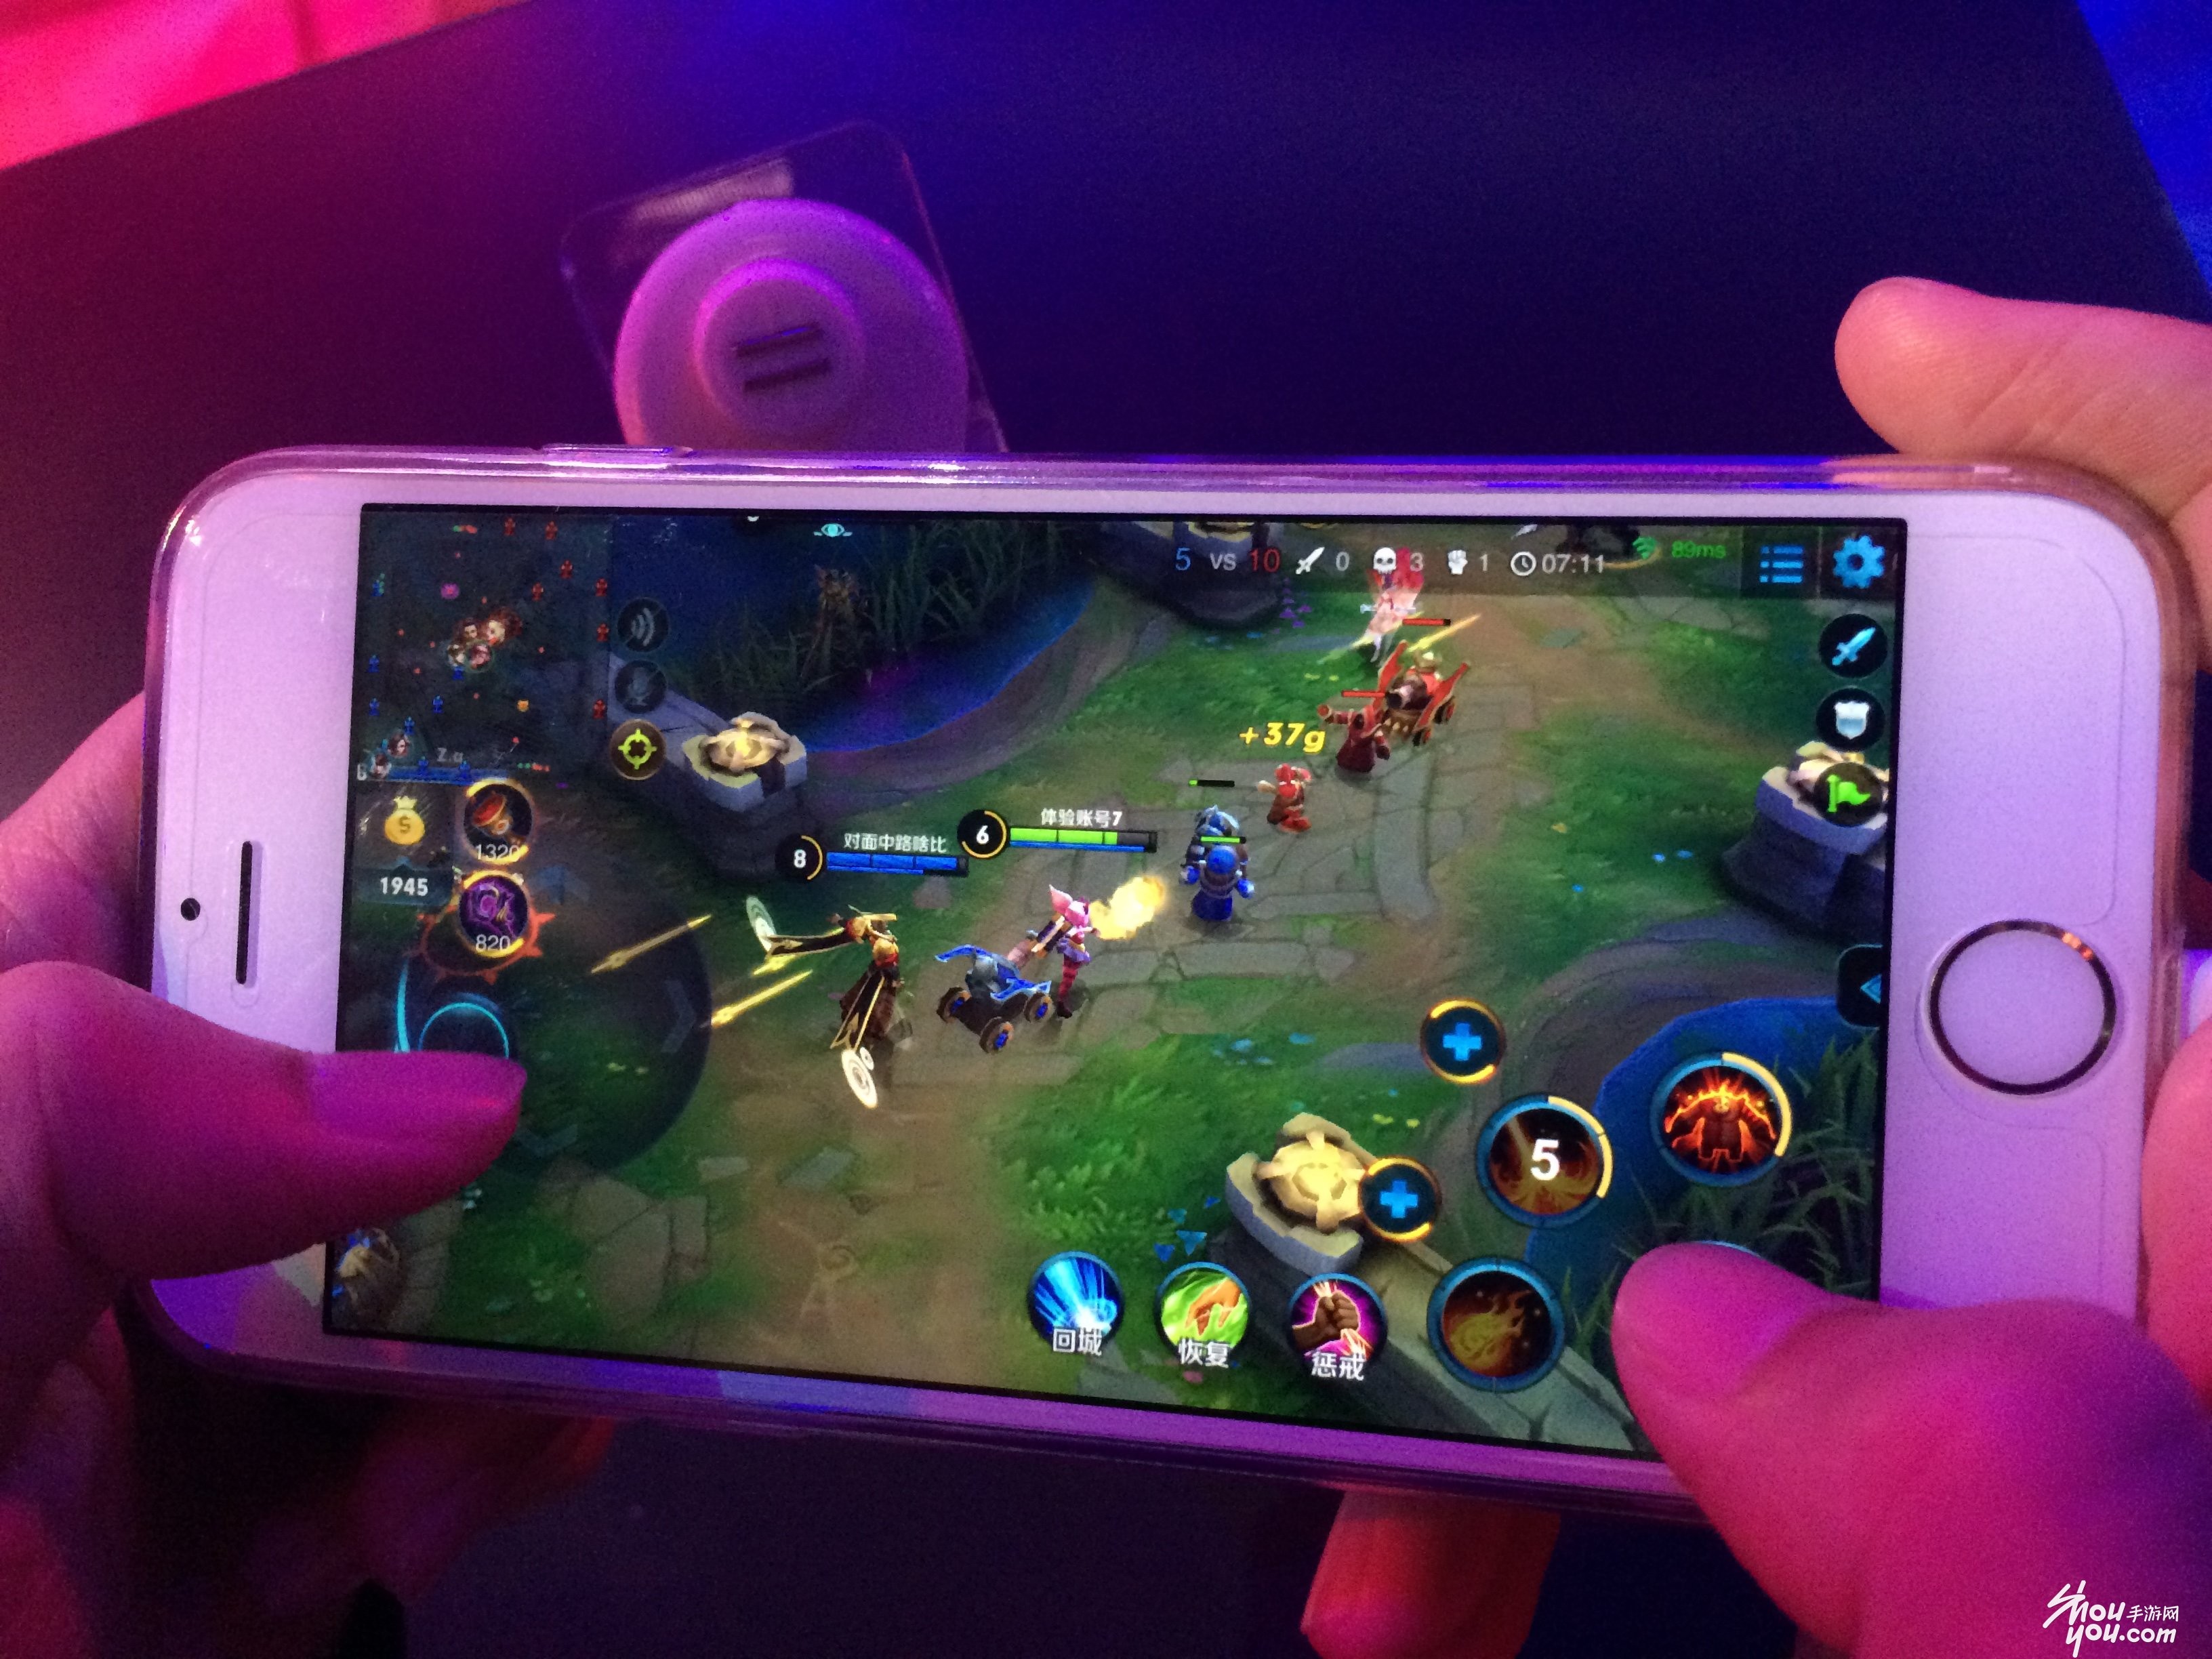 Tencent led losses in Hong Kong after it said it would limit playing time for Honour of Kings, its popular role-playing game for smartphones. Photo: SCMP Handout